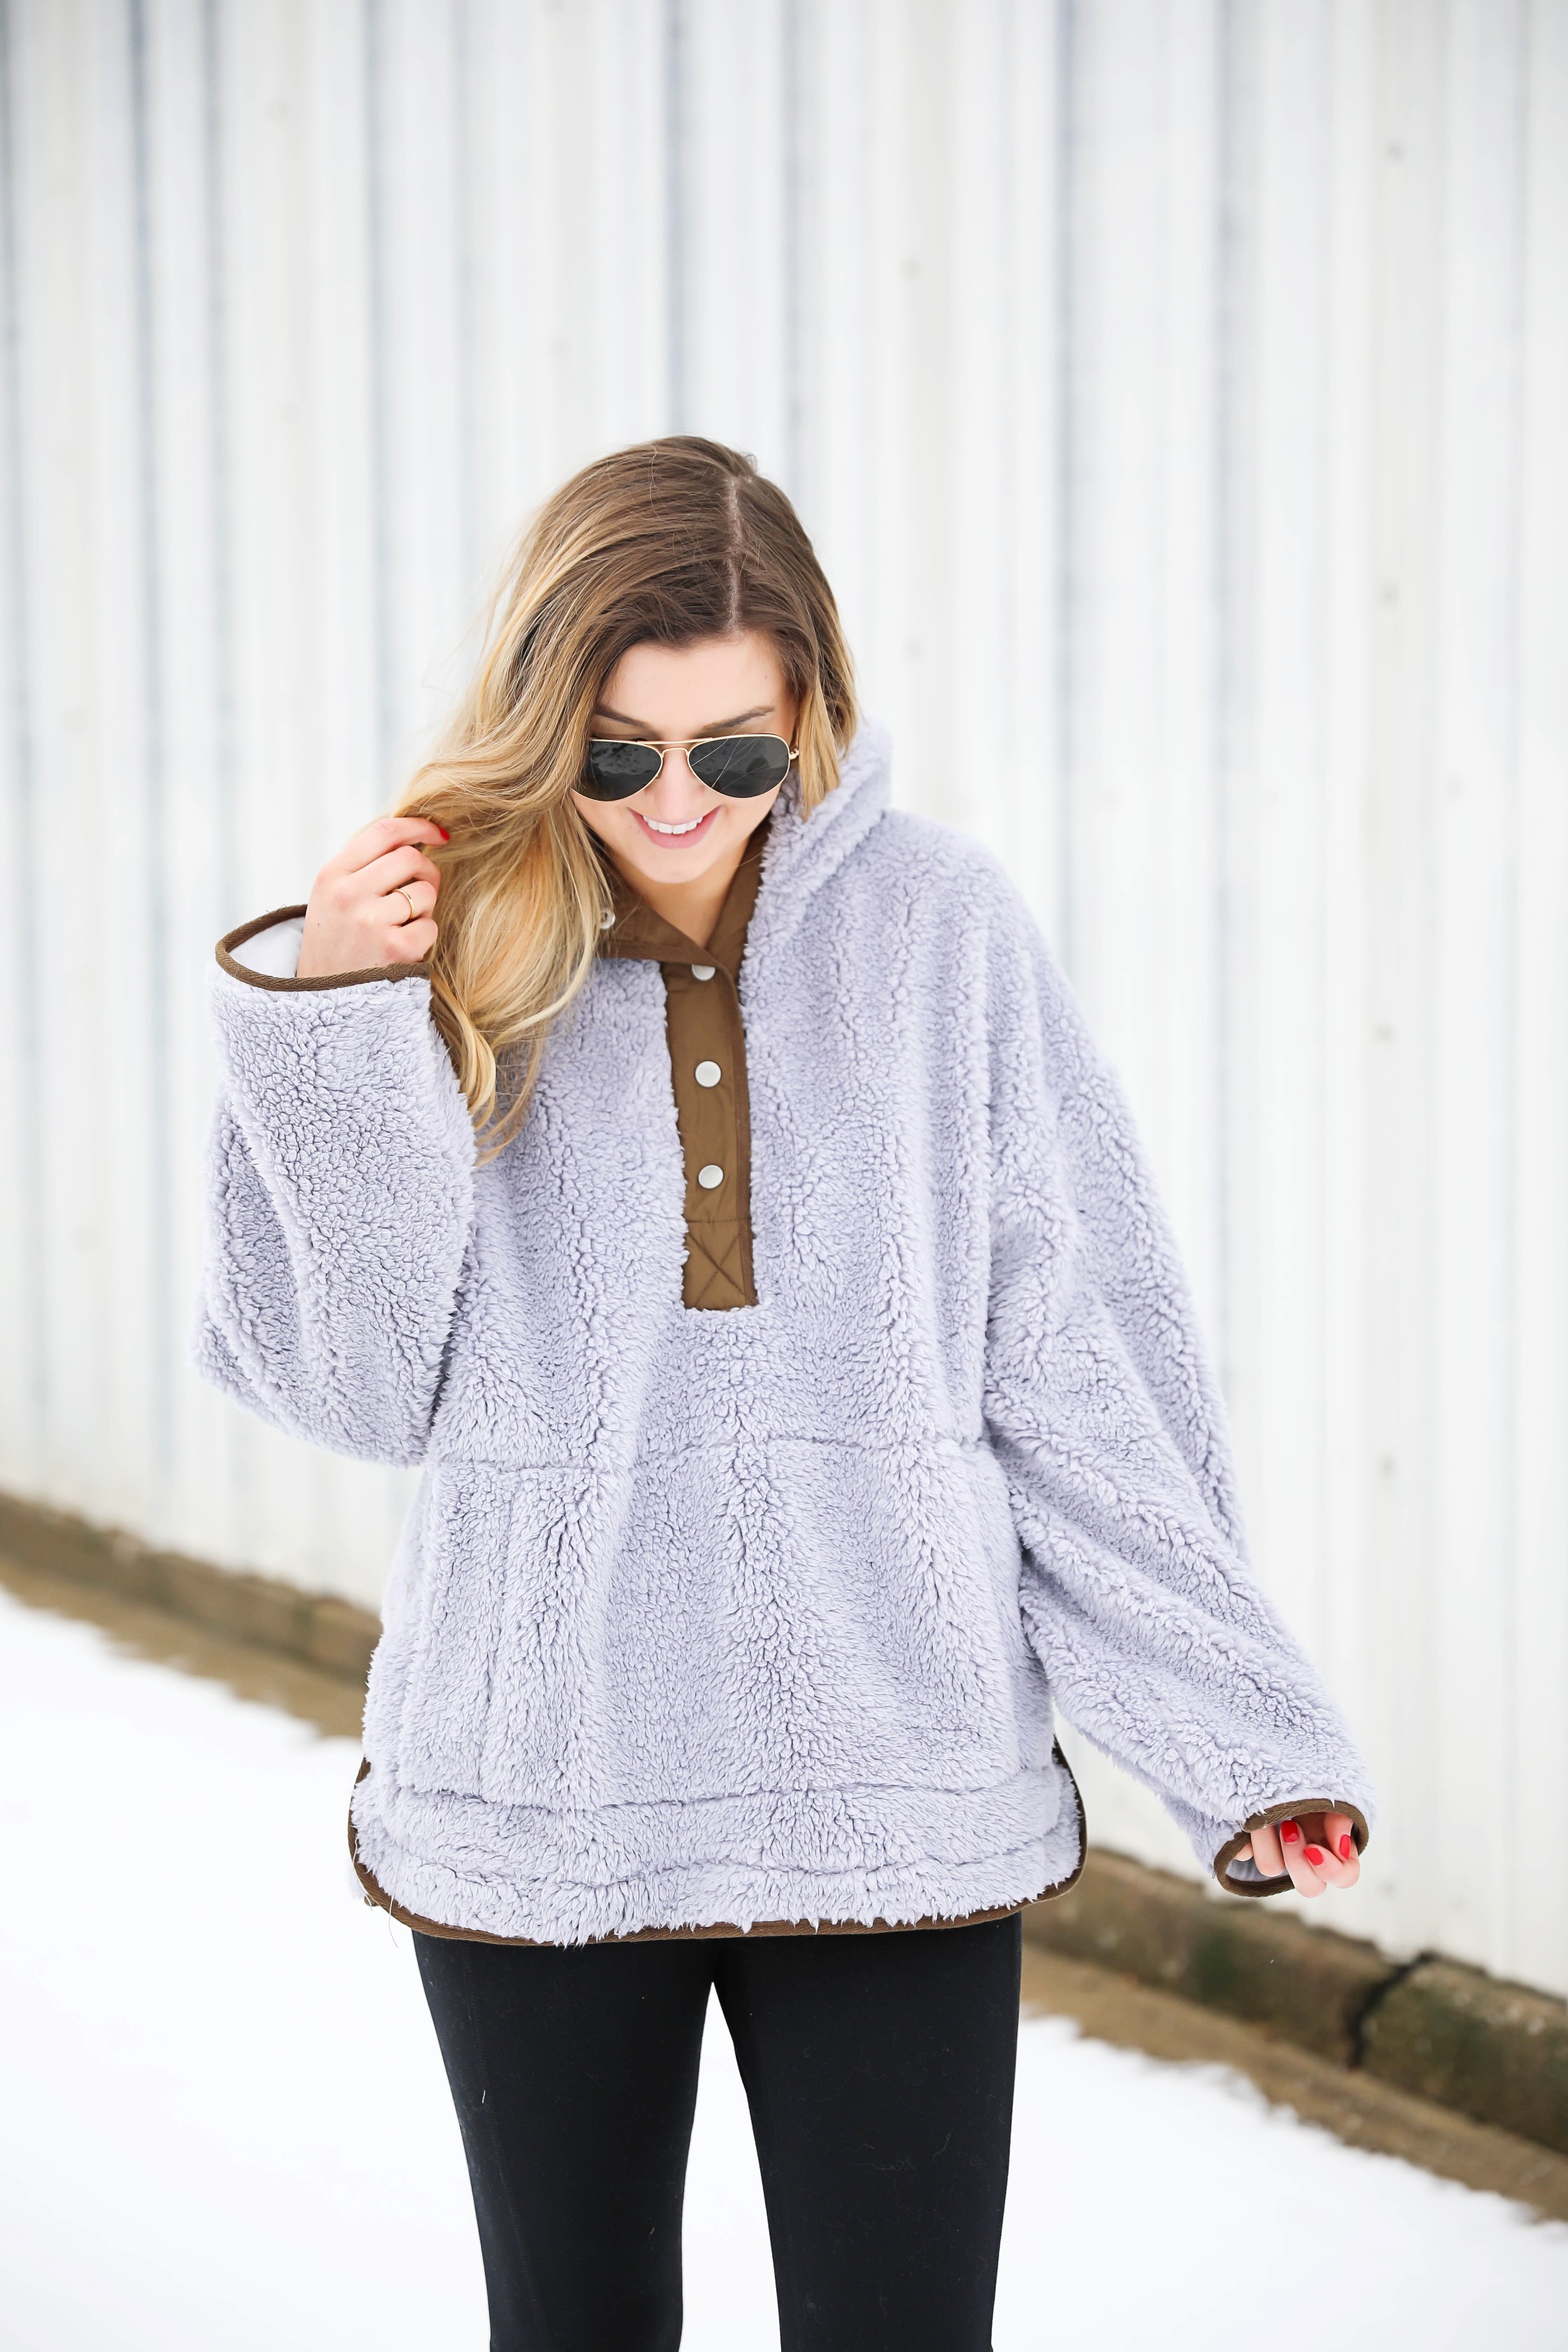 Free People Sweatshirt! I love this cozy grey pullover, it is so soft and comy! Get these casual outfit details on fashion blog daily dose of charm by lauren lindmark